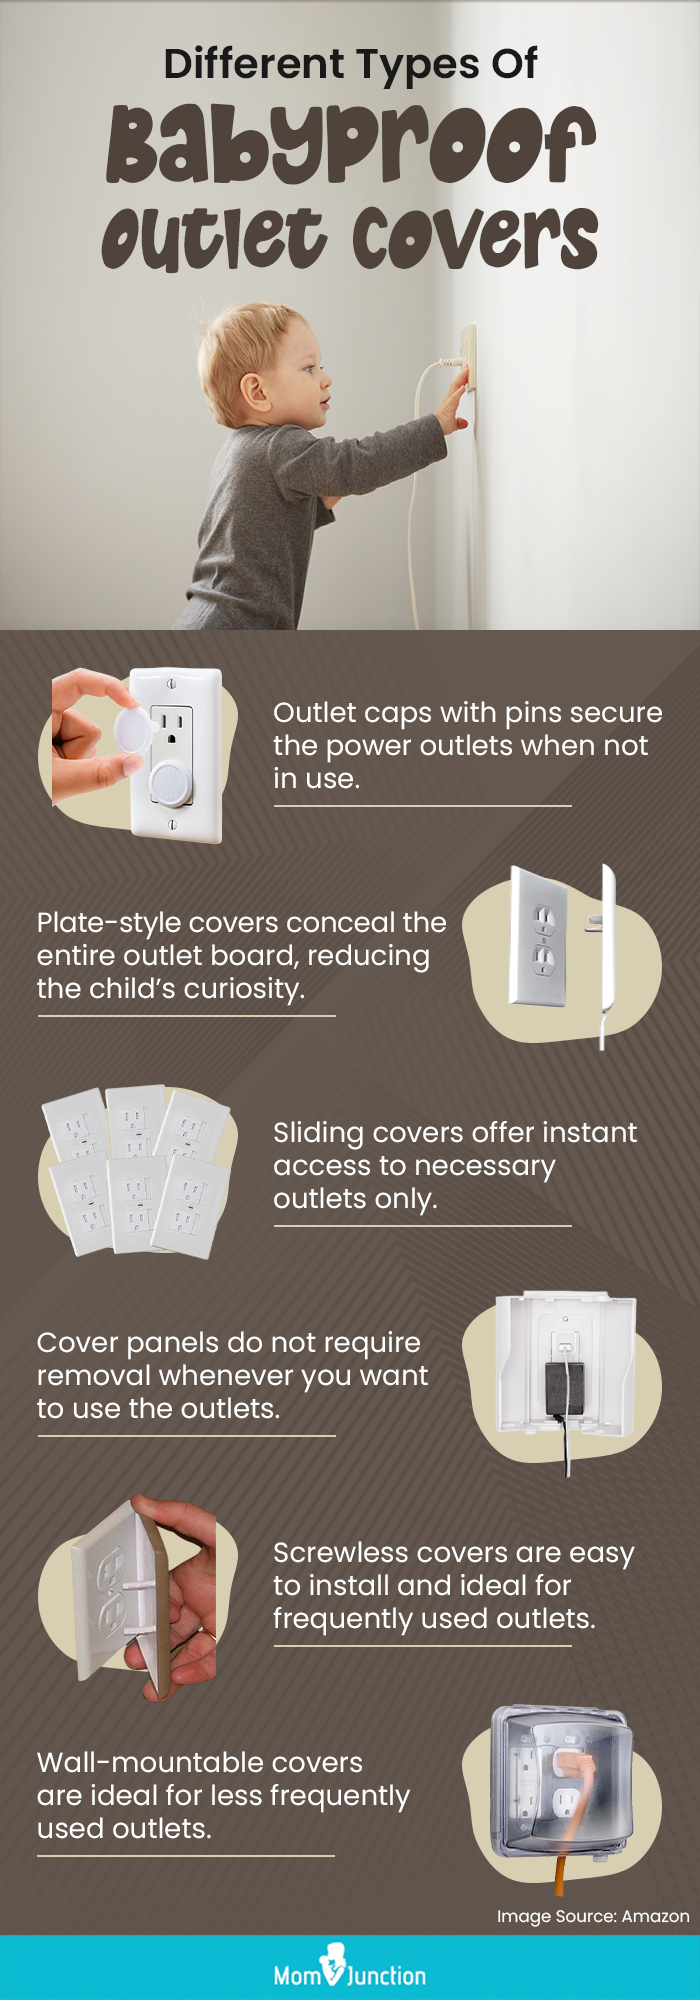 Different Types Of Babyproof Outlet Covers (infographic)